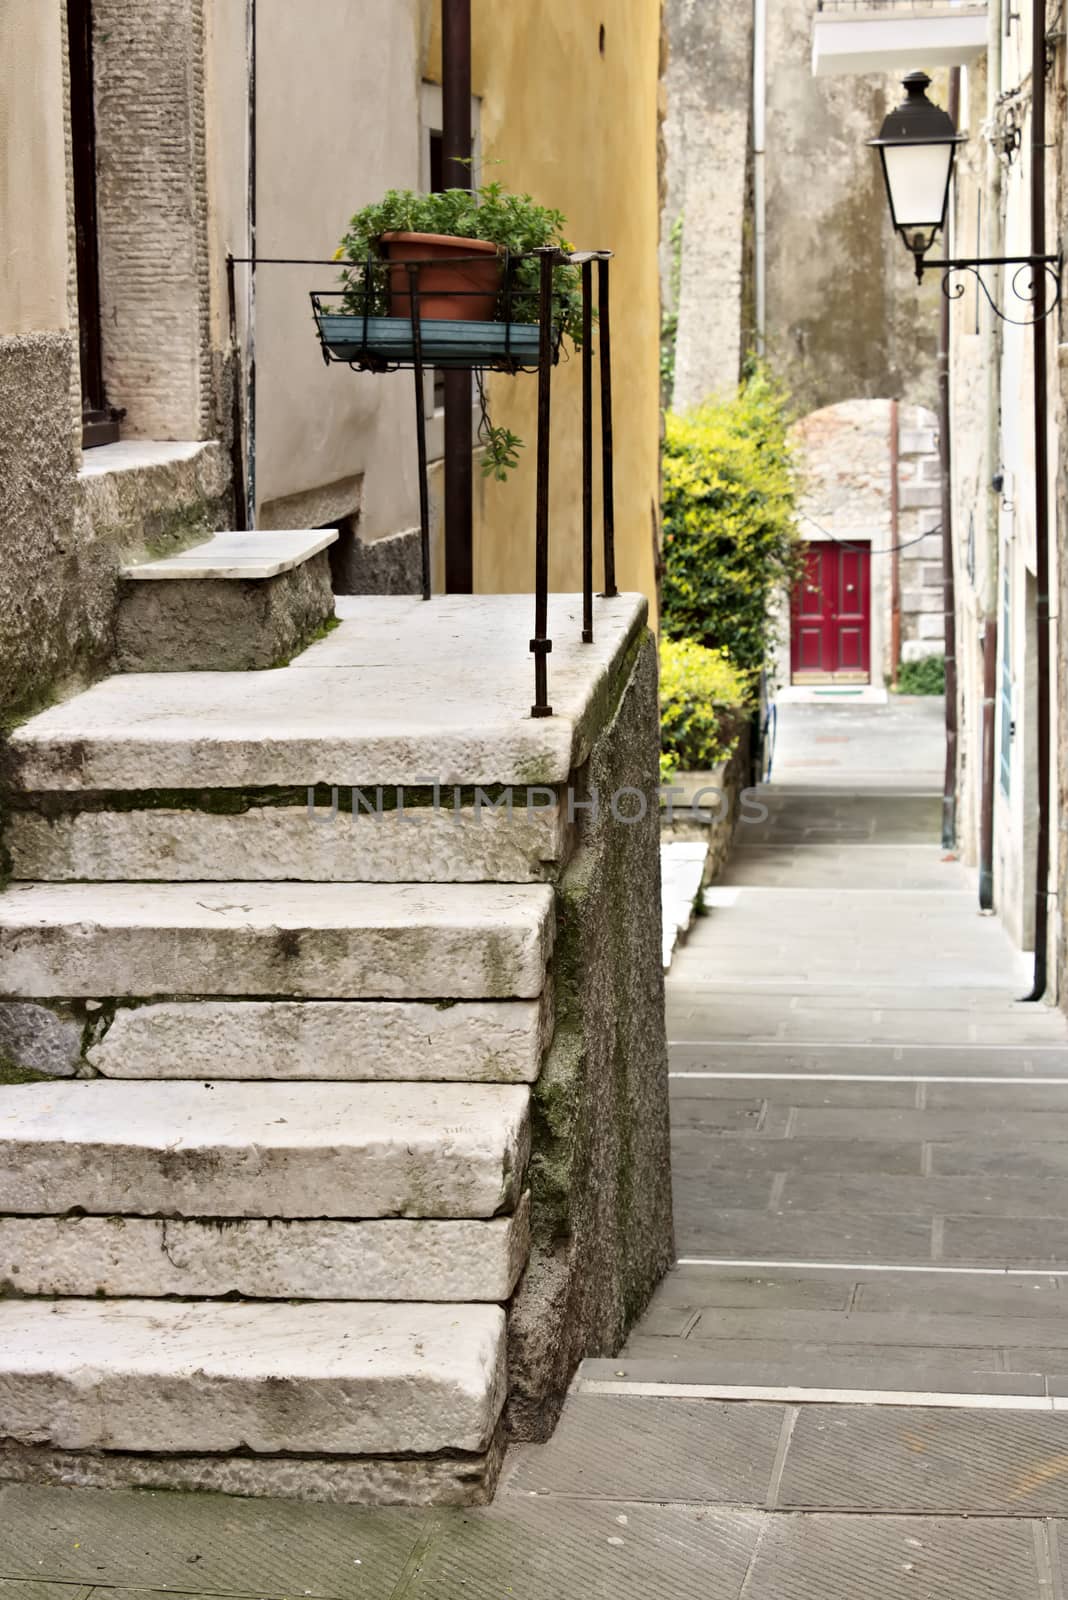 Colonnata, Carrara, Tuscany, Italy. Street of the ancient village of Colonnata, famous for the production of lard. The ancient village of white marble quarrymen is located above Carrara, in northern Tuscany.